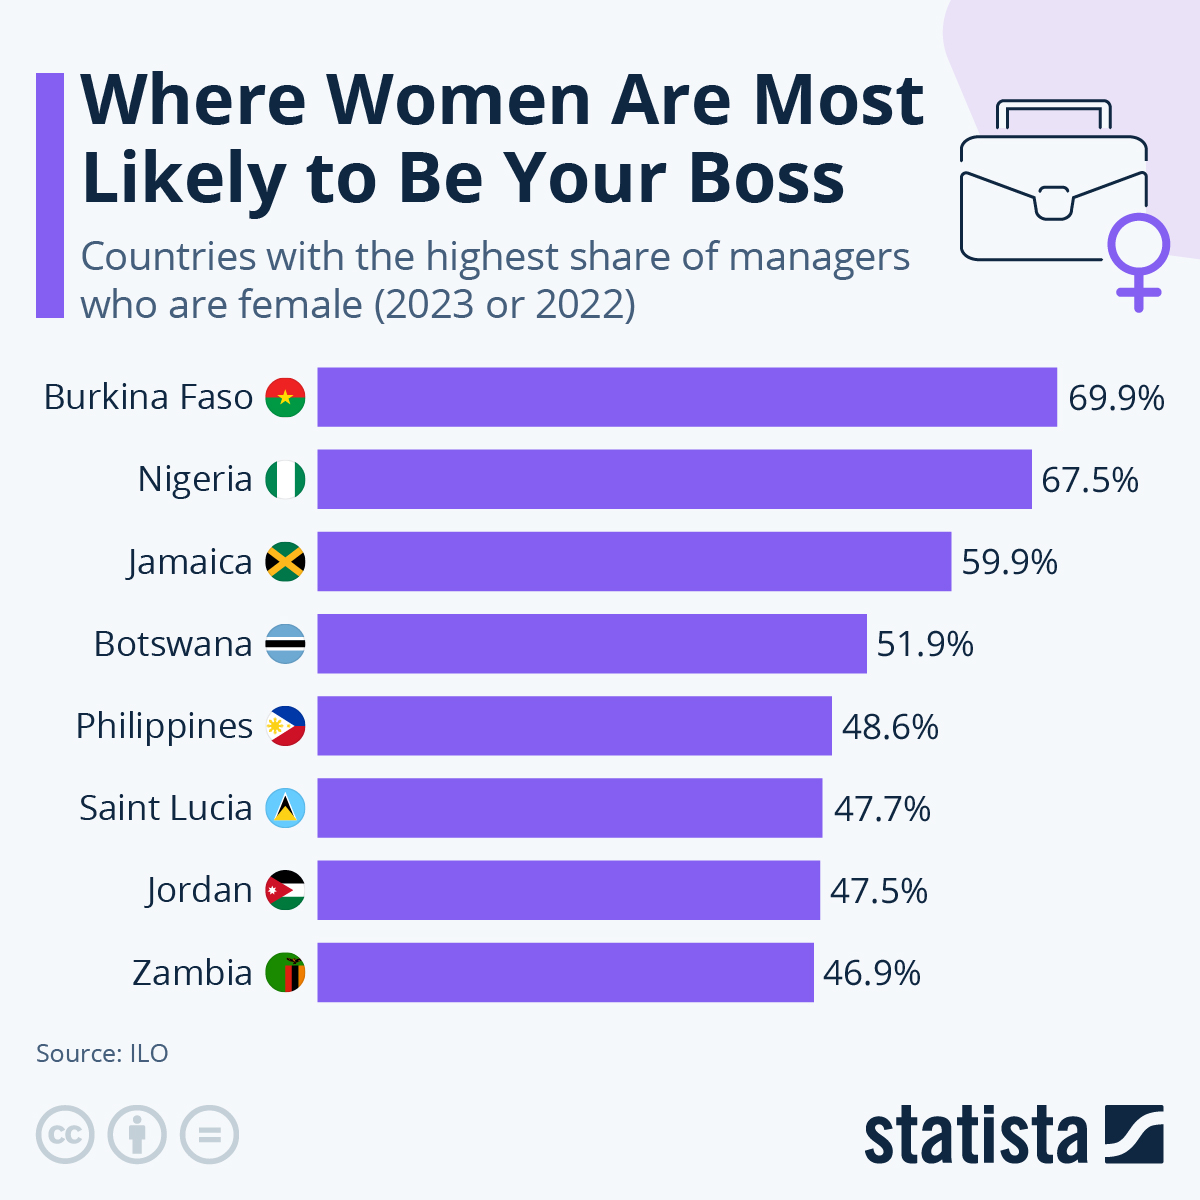 Where Women Are Most Likely to Be Your Boss

ow.ly/MSKq50RtaG3

#WomenInLeadership #FemaleEntrepreneurs #WomenInBusiness #EmpowerWomen #WomenLeaders #WomenInManagement #WomenCEOs #GenderEquality #WomenInCharge